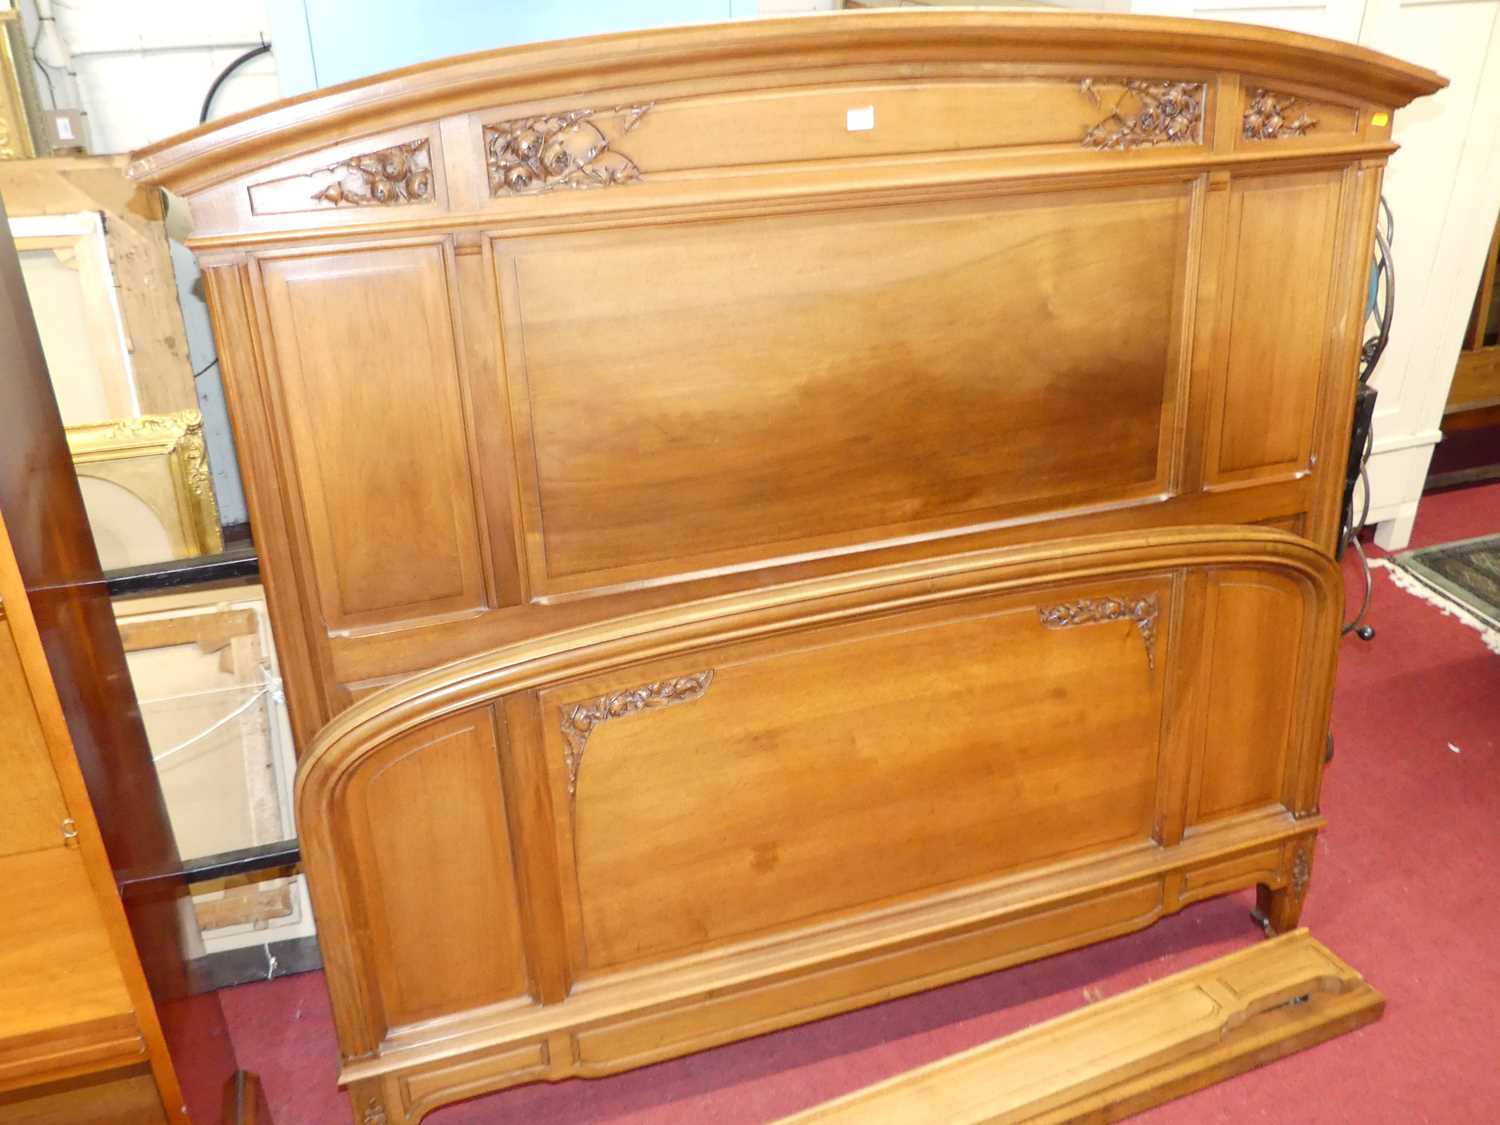 A circa 1900 Vienna secessionist walnut double bedstead, the recessed panelled head and footboard